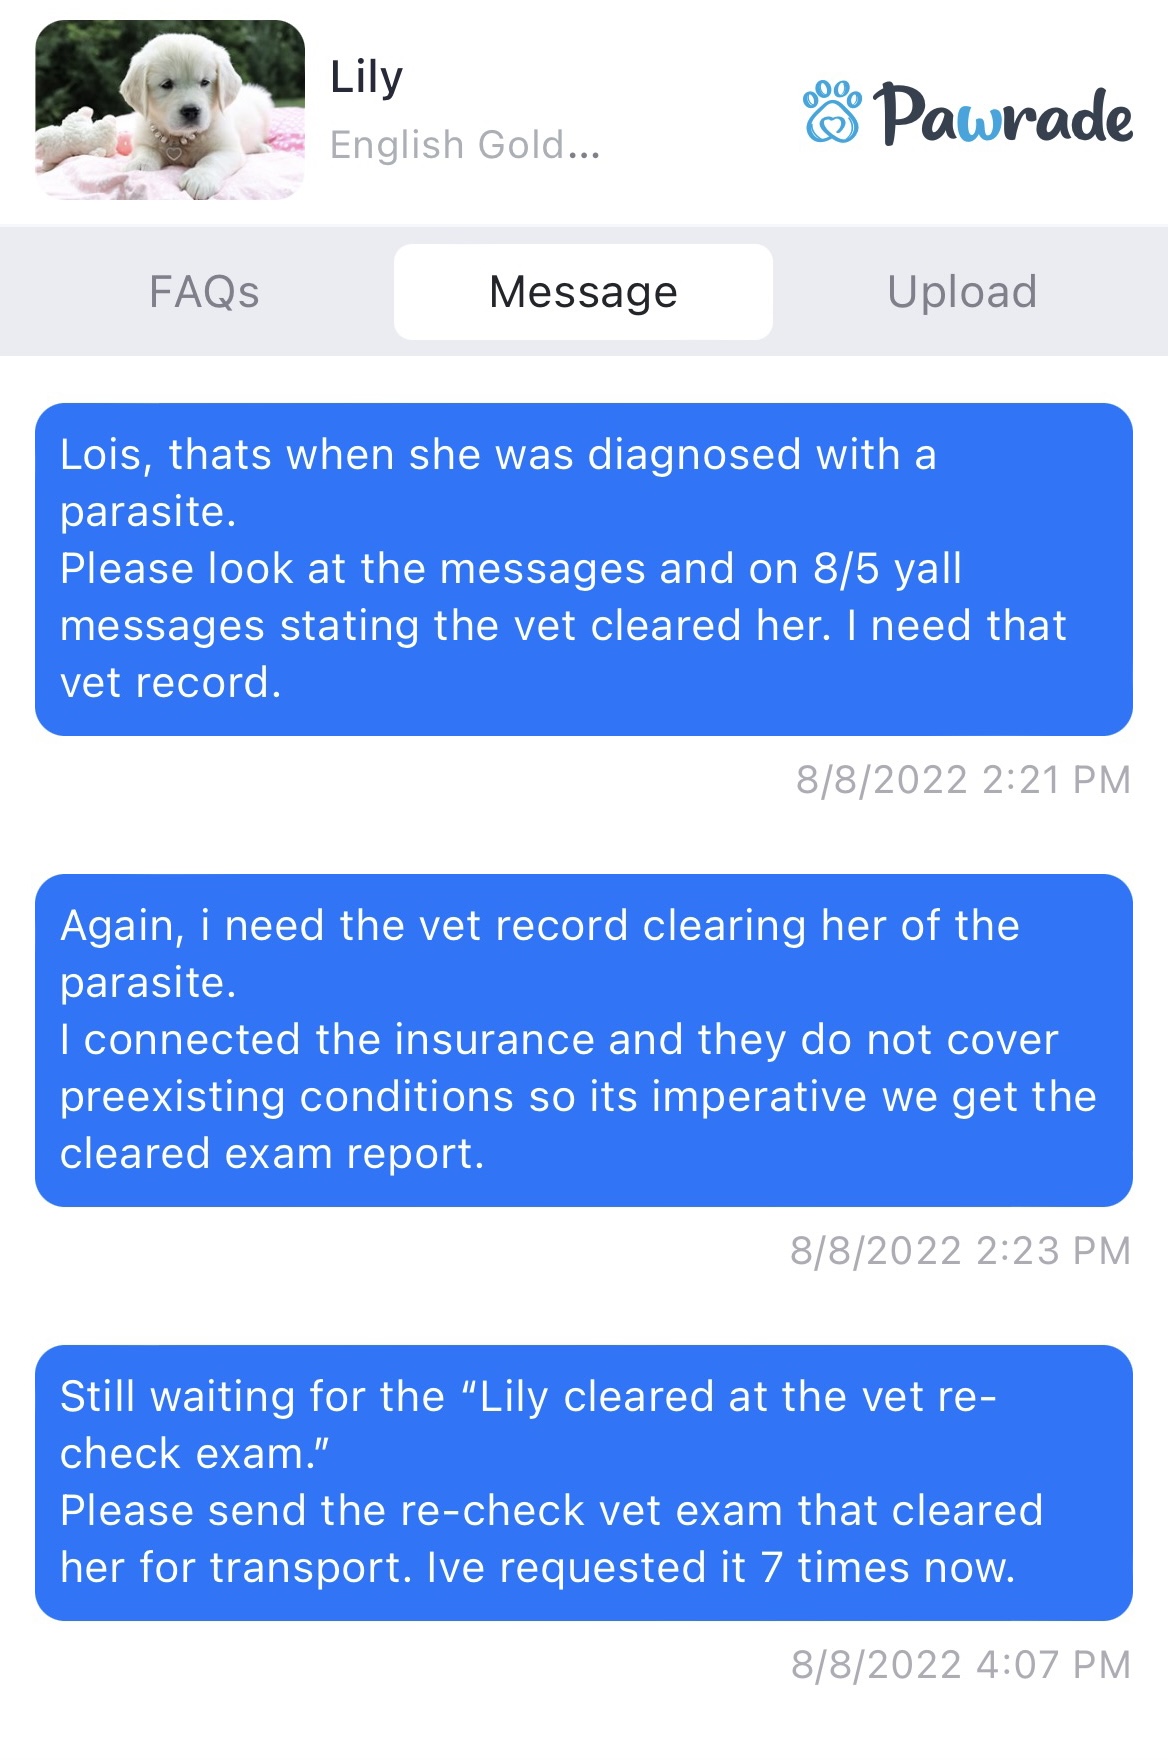 Continuously requesting 'cleared vet exam'